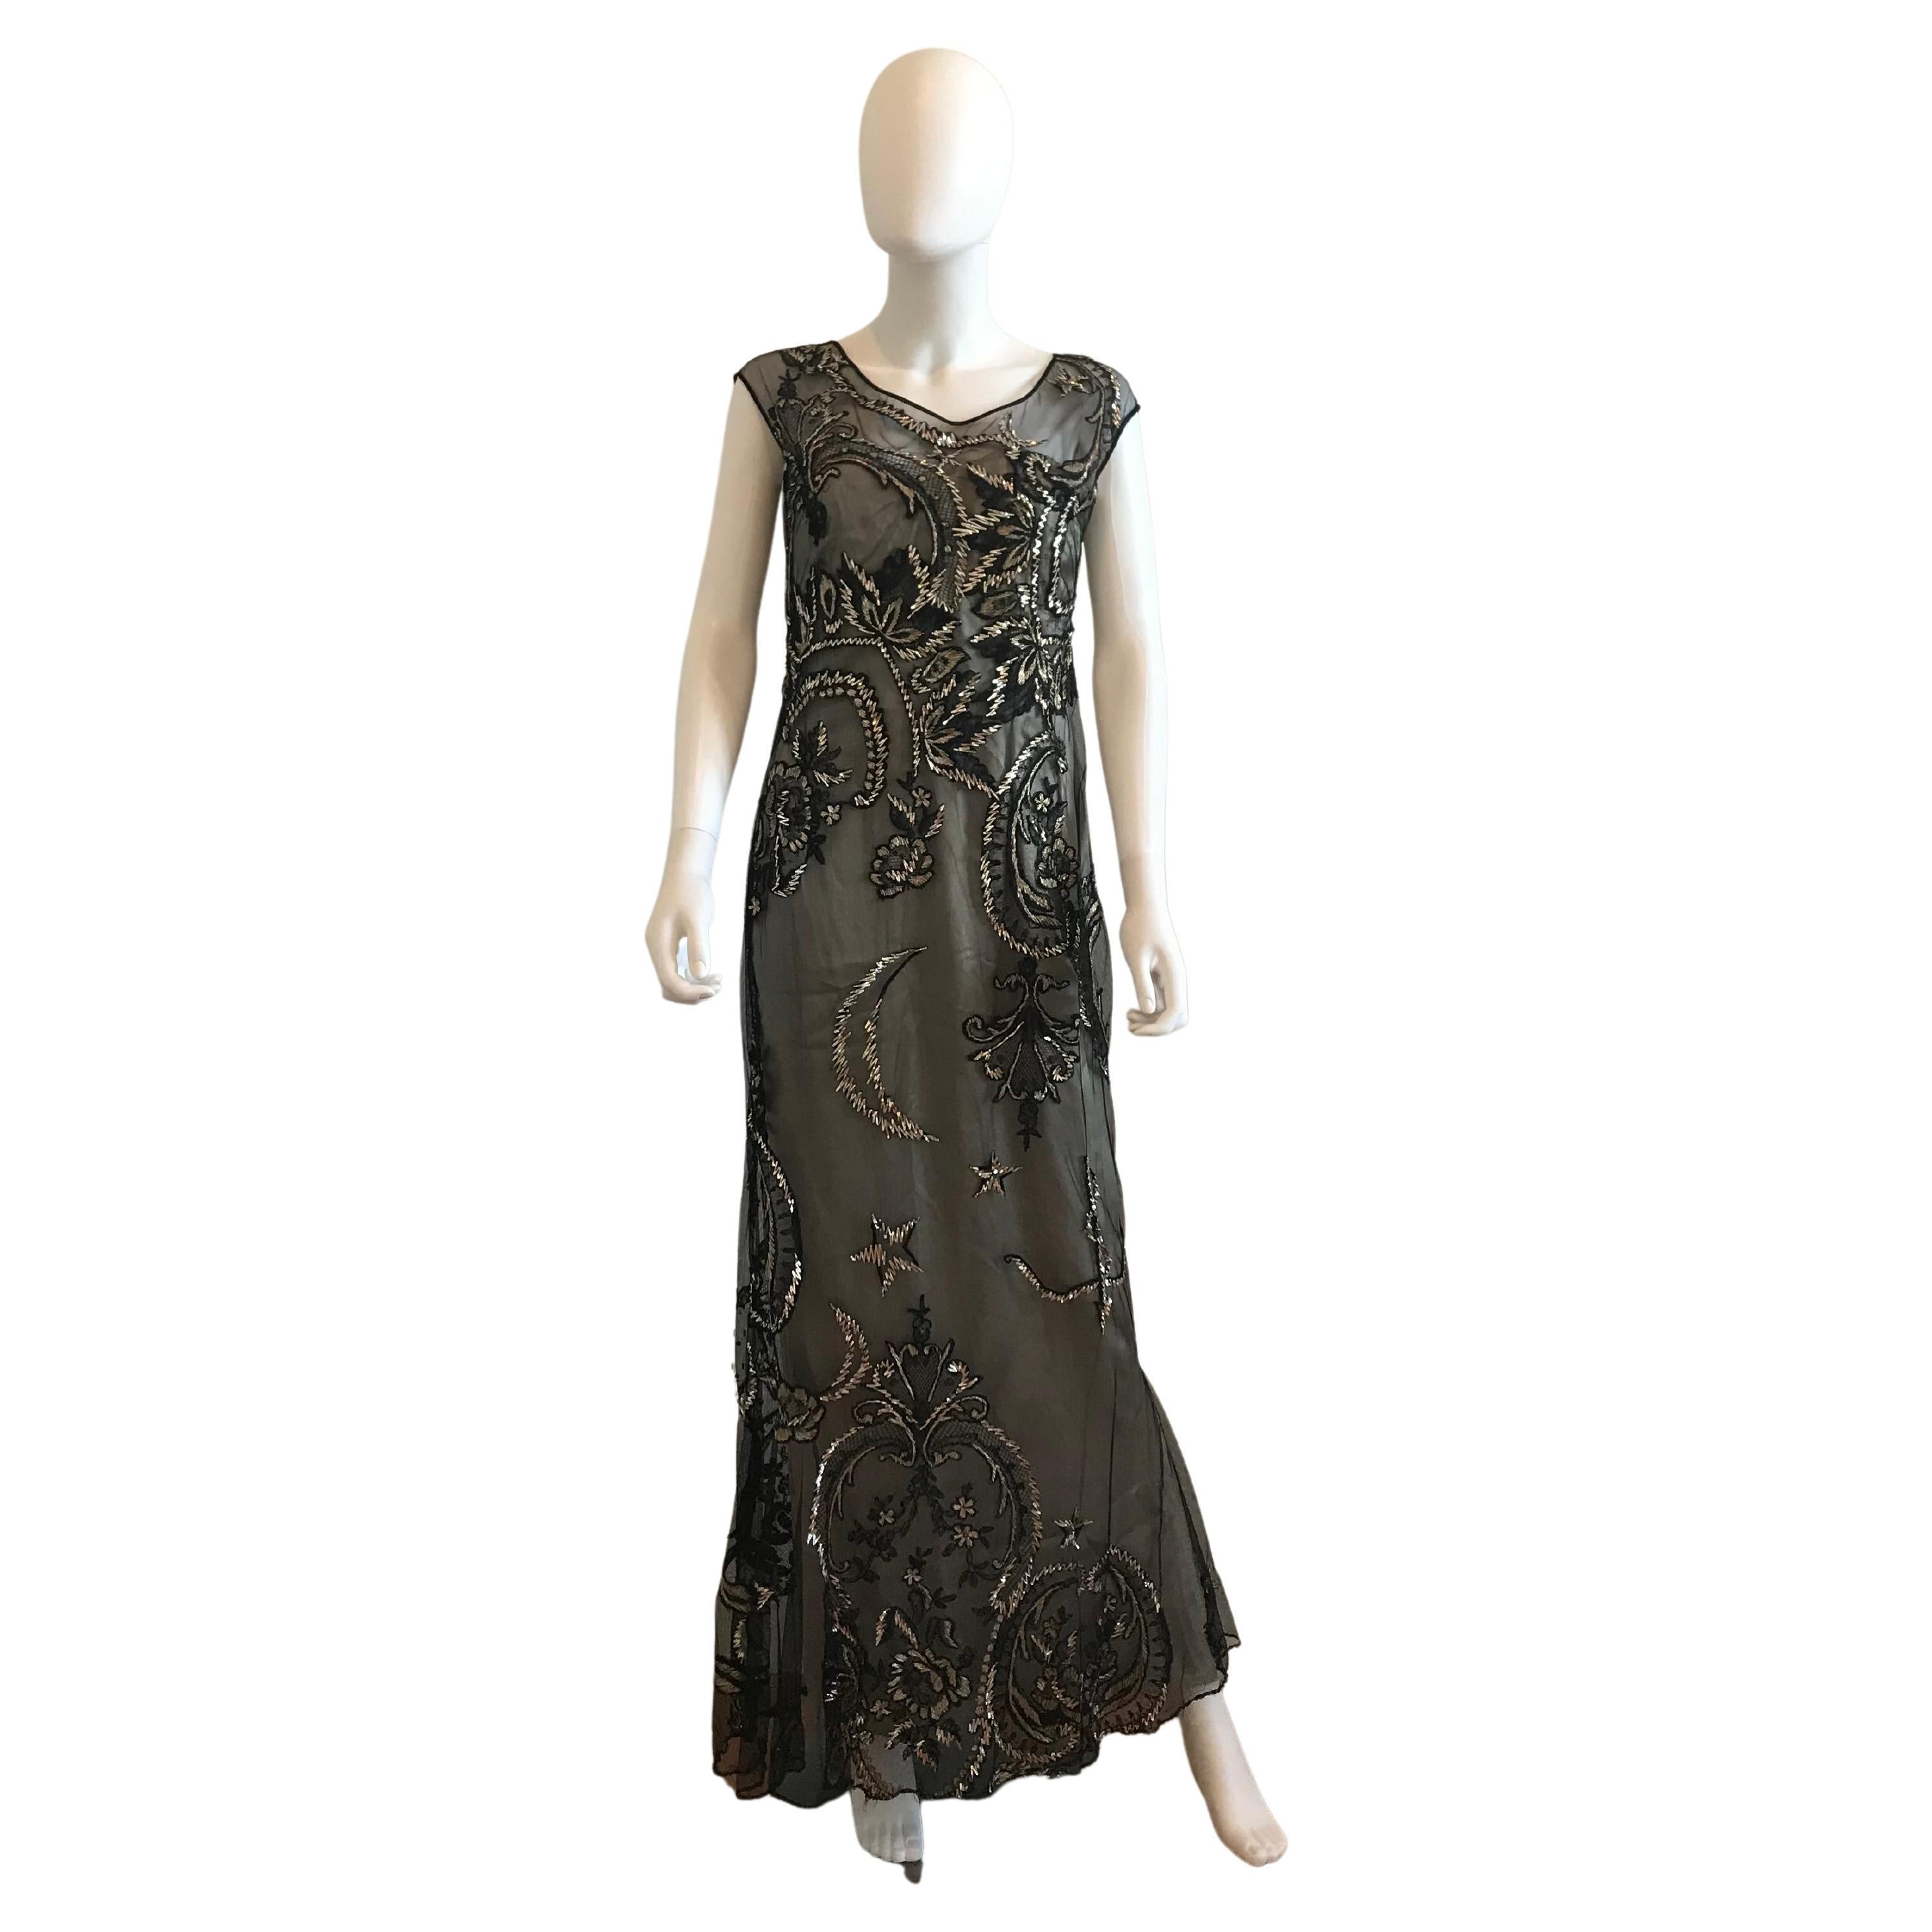 FW 1998 Gianfranco Ferre Metallic Embroidered Tulle Evening Gown For Sale